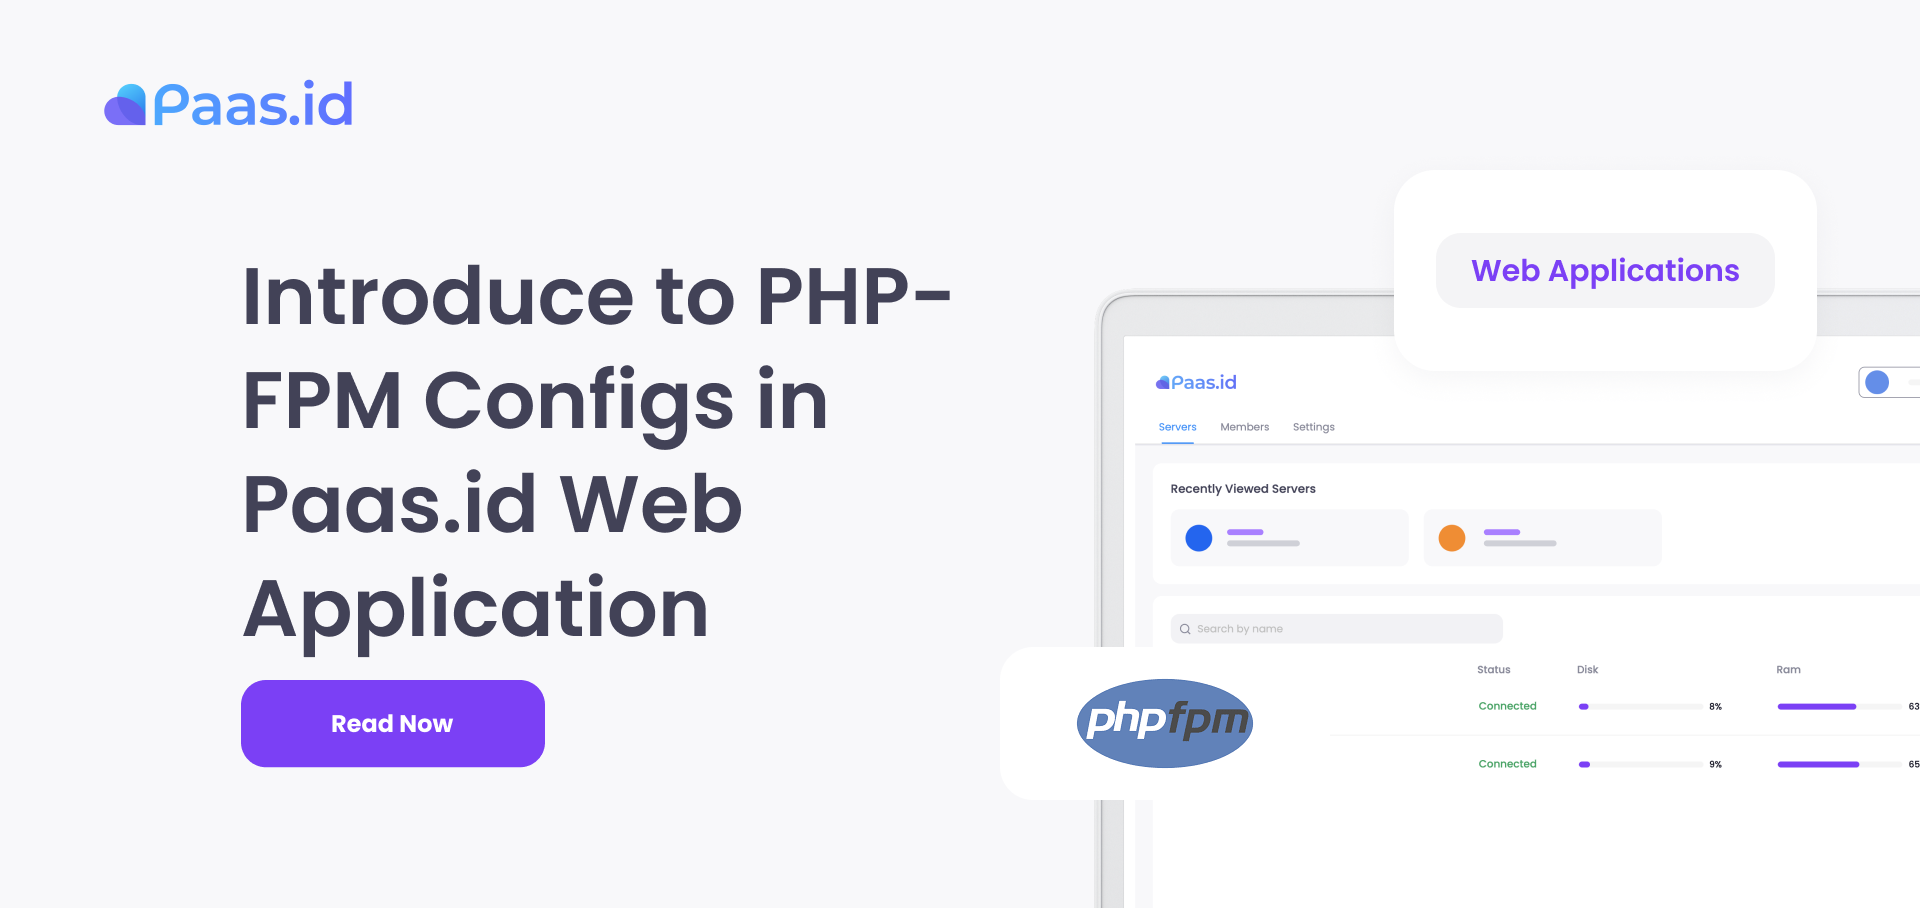 Introduce to PHP-FPM Configs in Paas.id Web Application